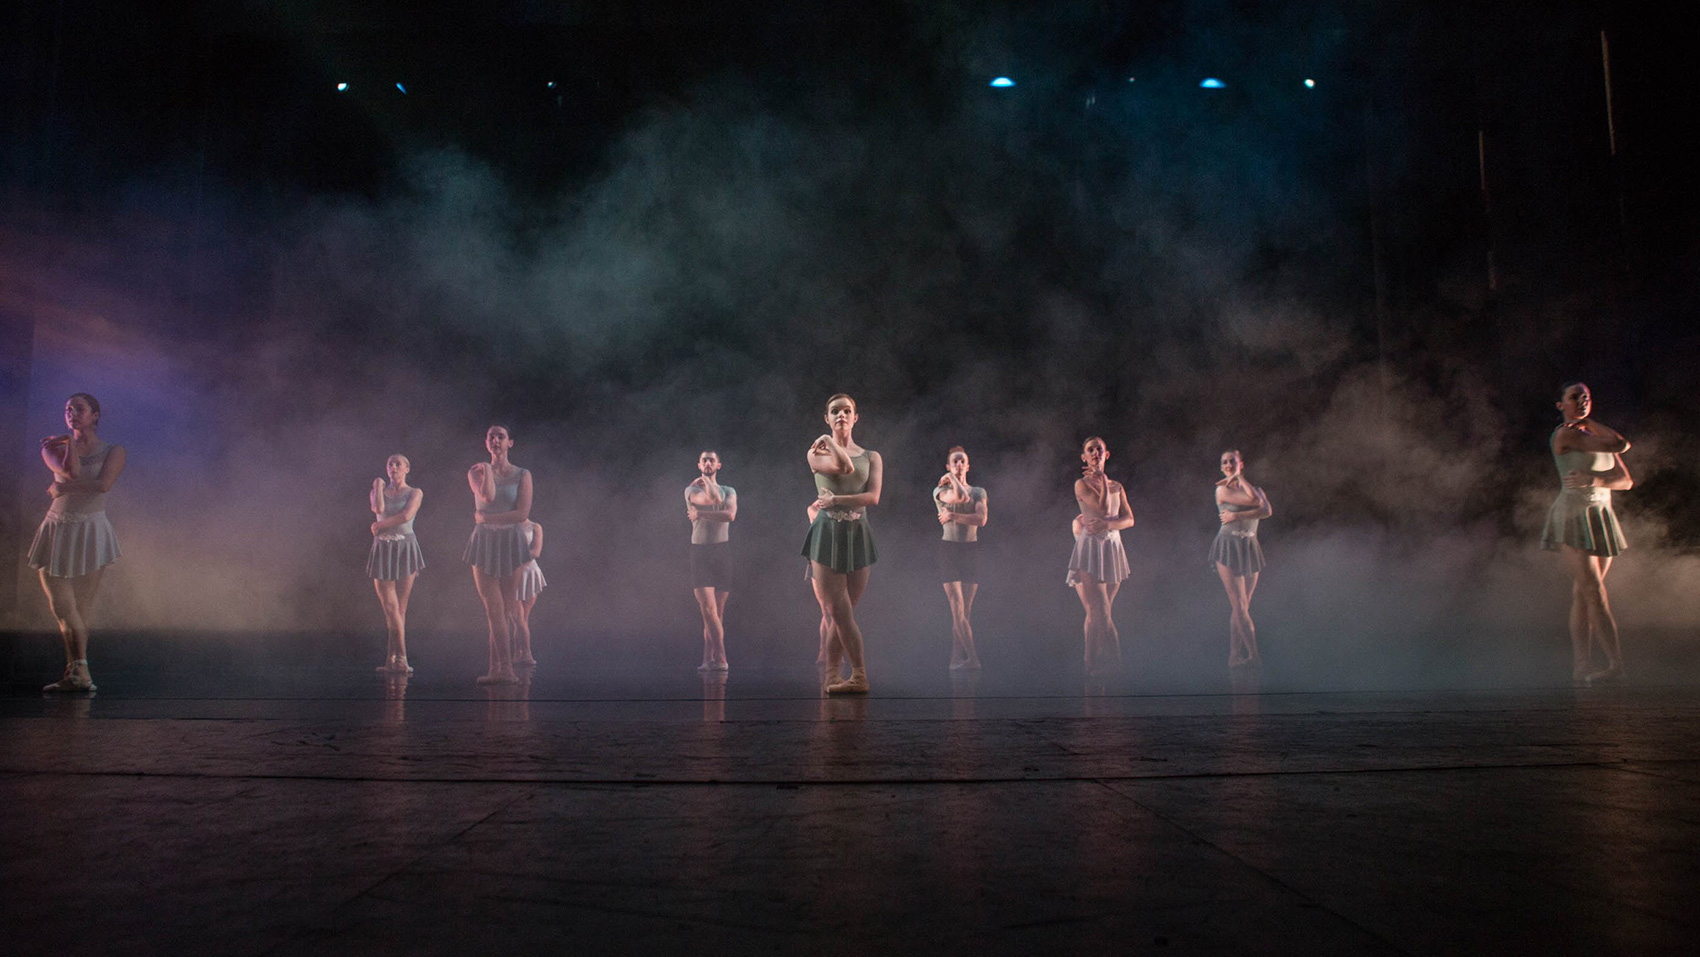 Female ballet dancers hold the same pose onstage, a haze of atmospheric lighting and smoke flowing over them.